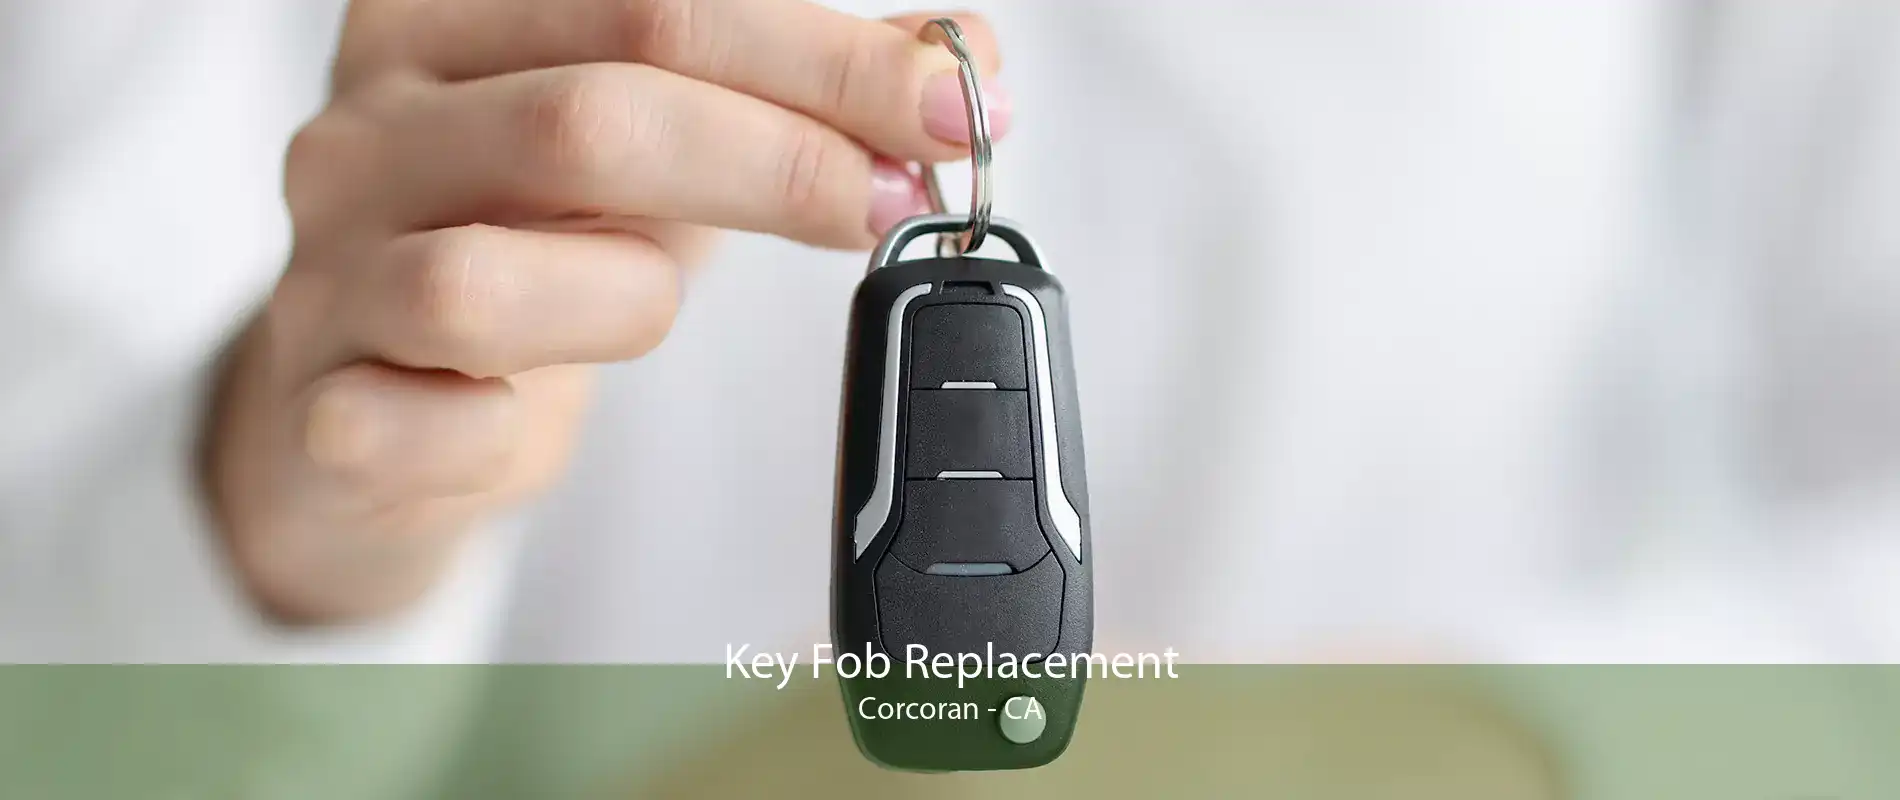 Key Fob Replacement Corcoran - CA